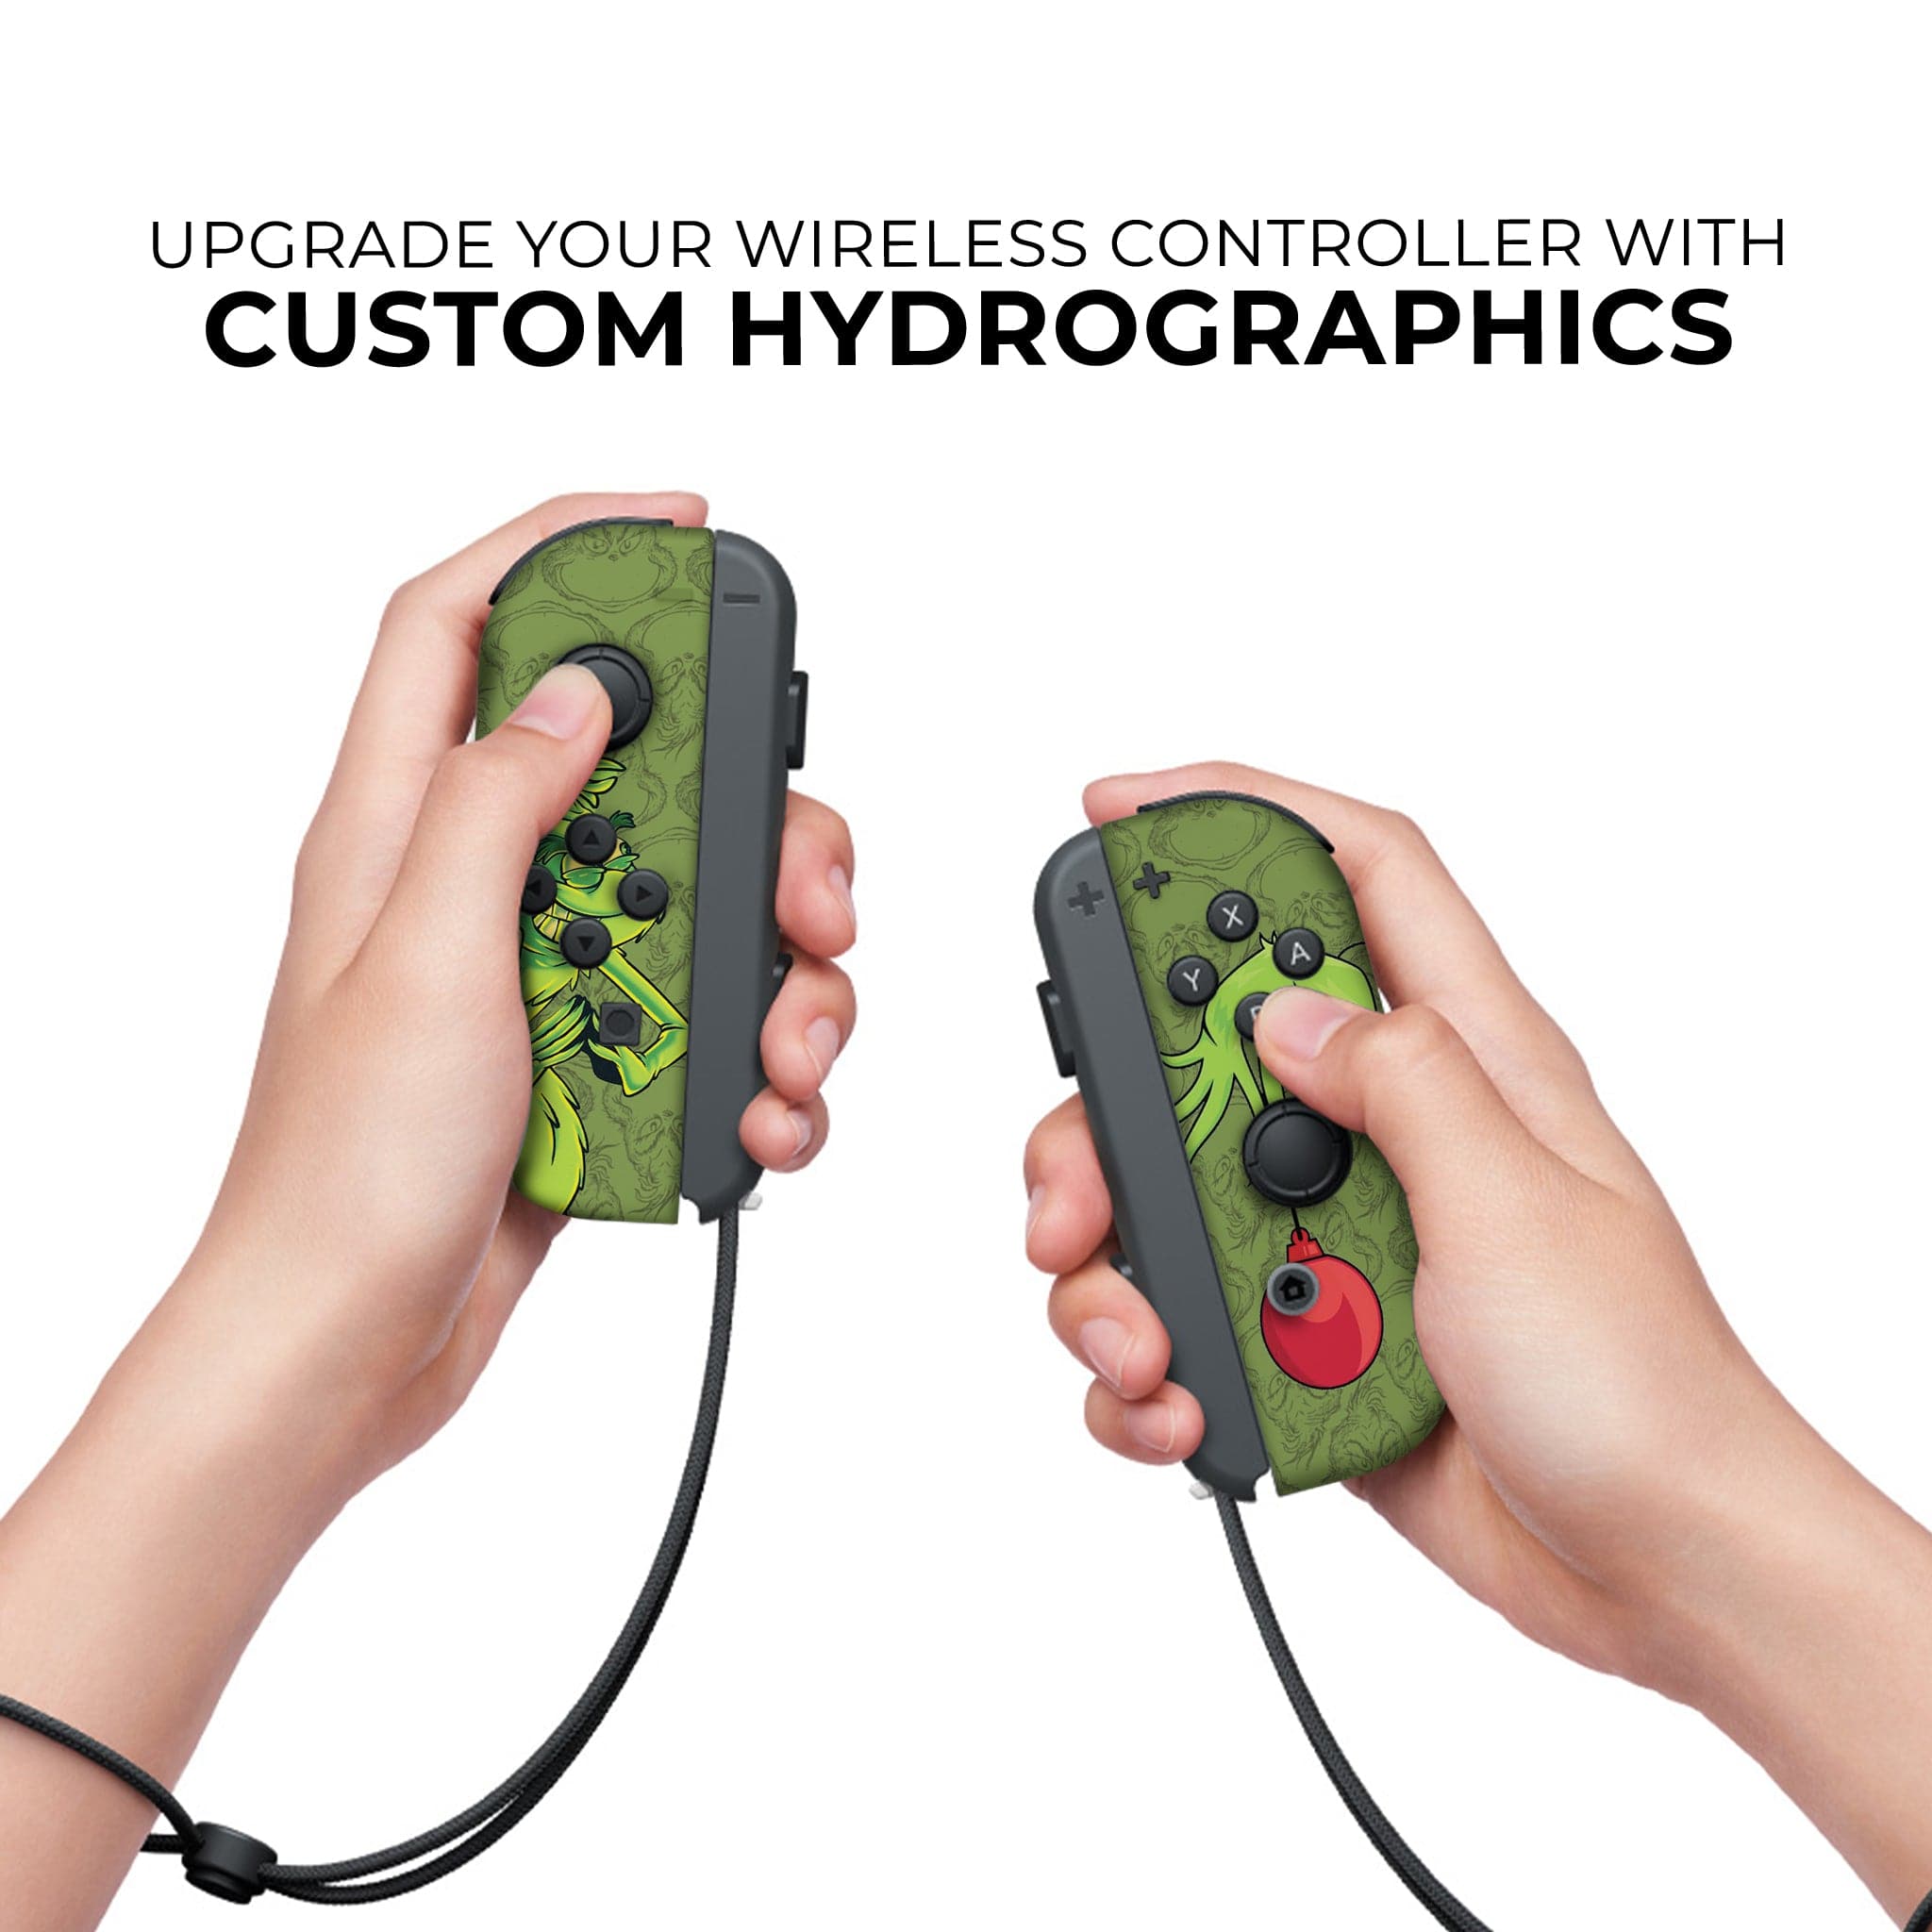 Grinch Joy-Con Left and Right My Nintendo Switch Controllers